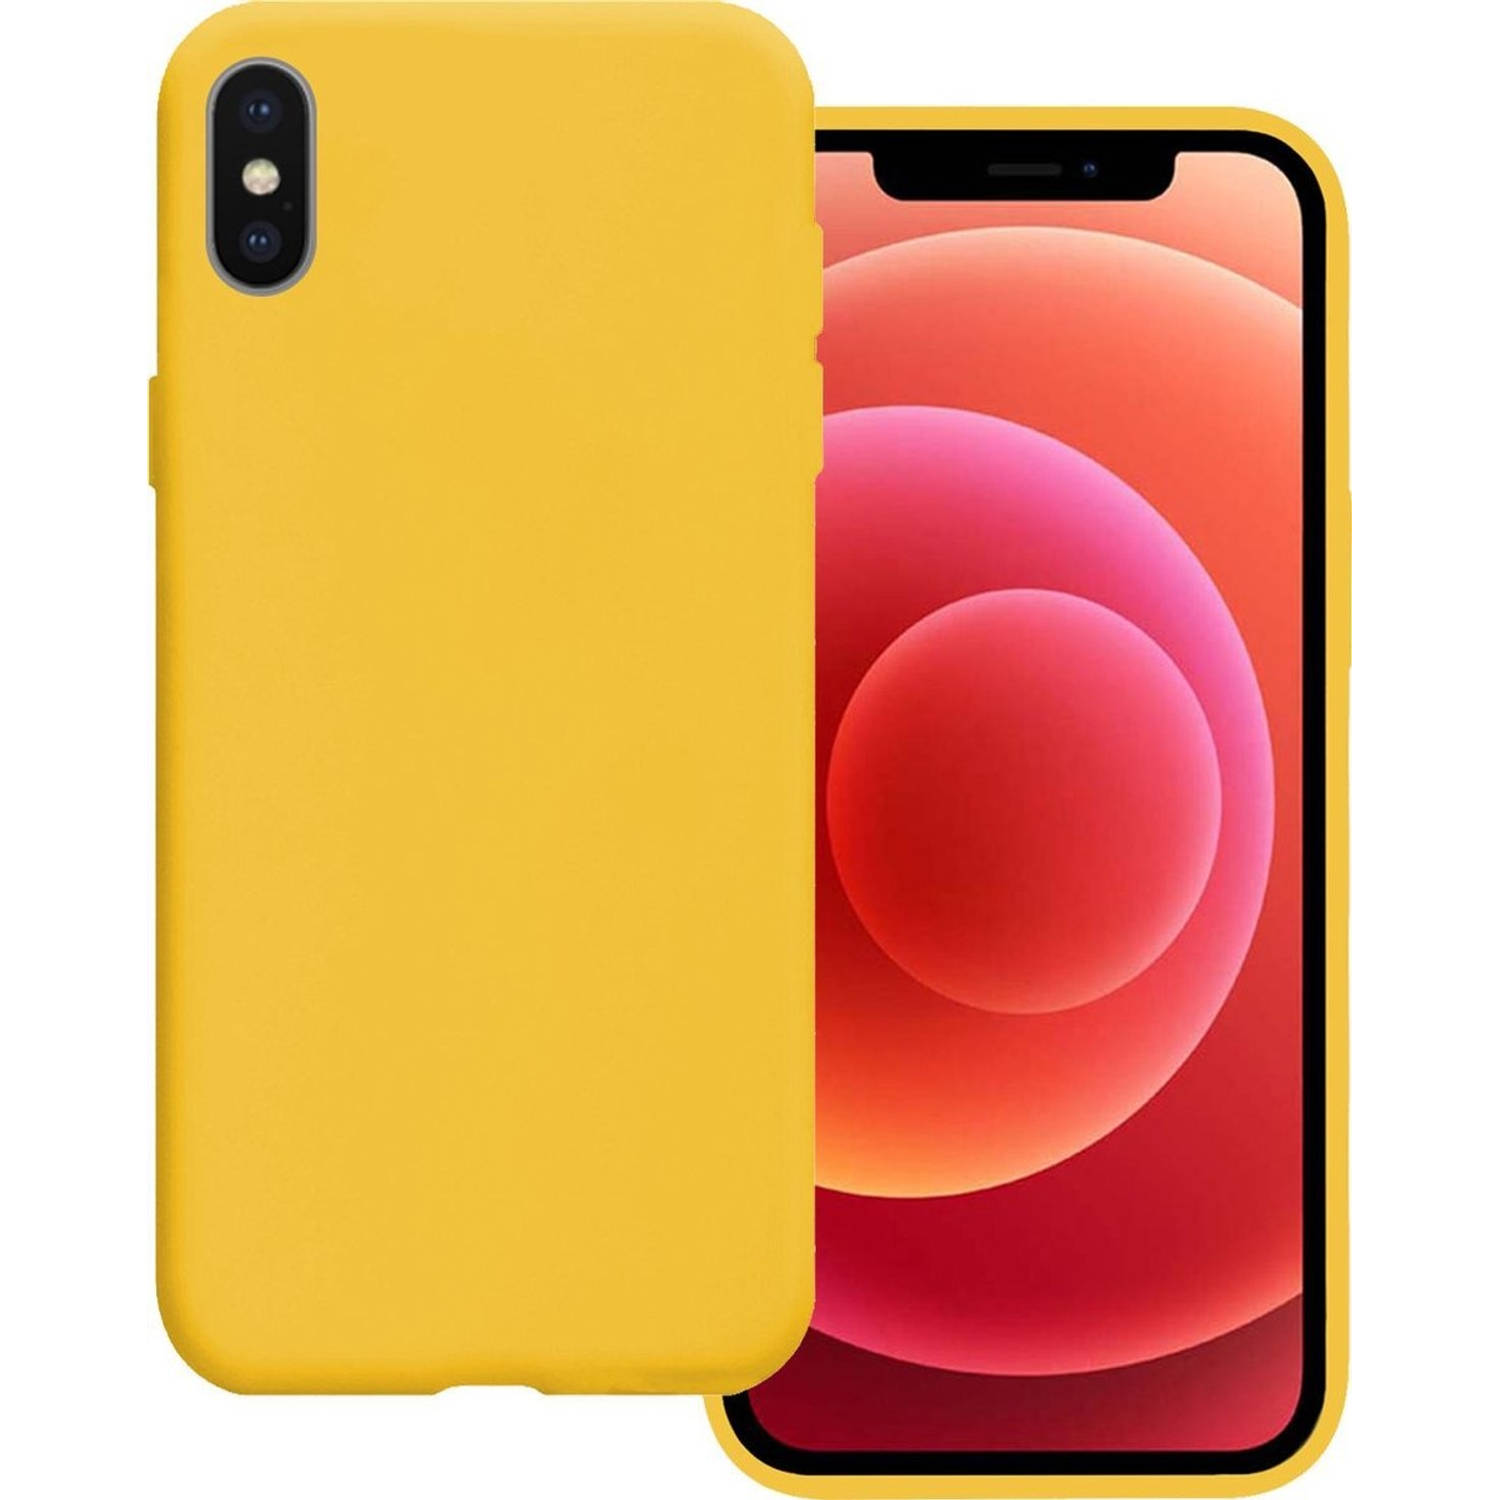 Basey iPhone Xs Max Hoesje Siliconen Hoes Case Cover iPhone Xs Max-Geel